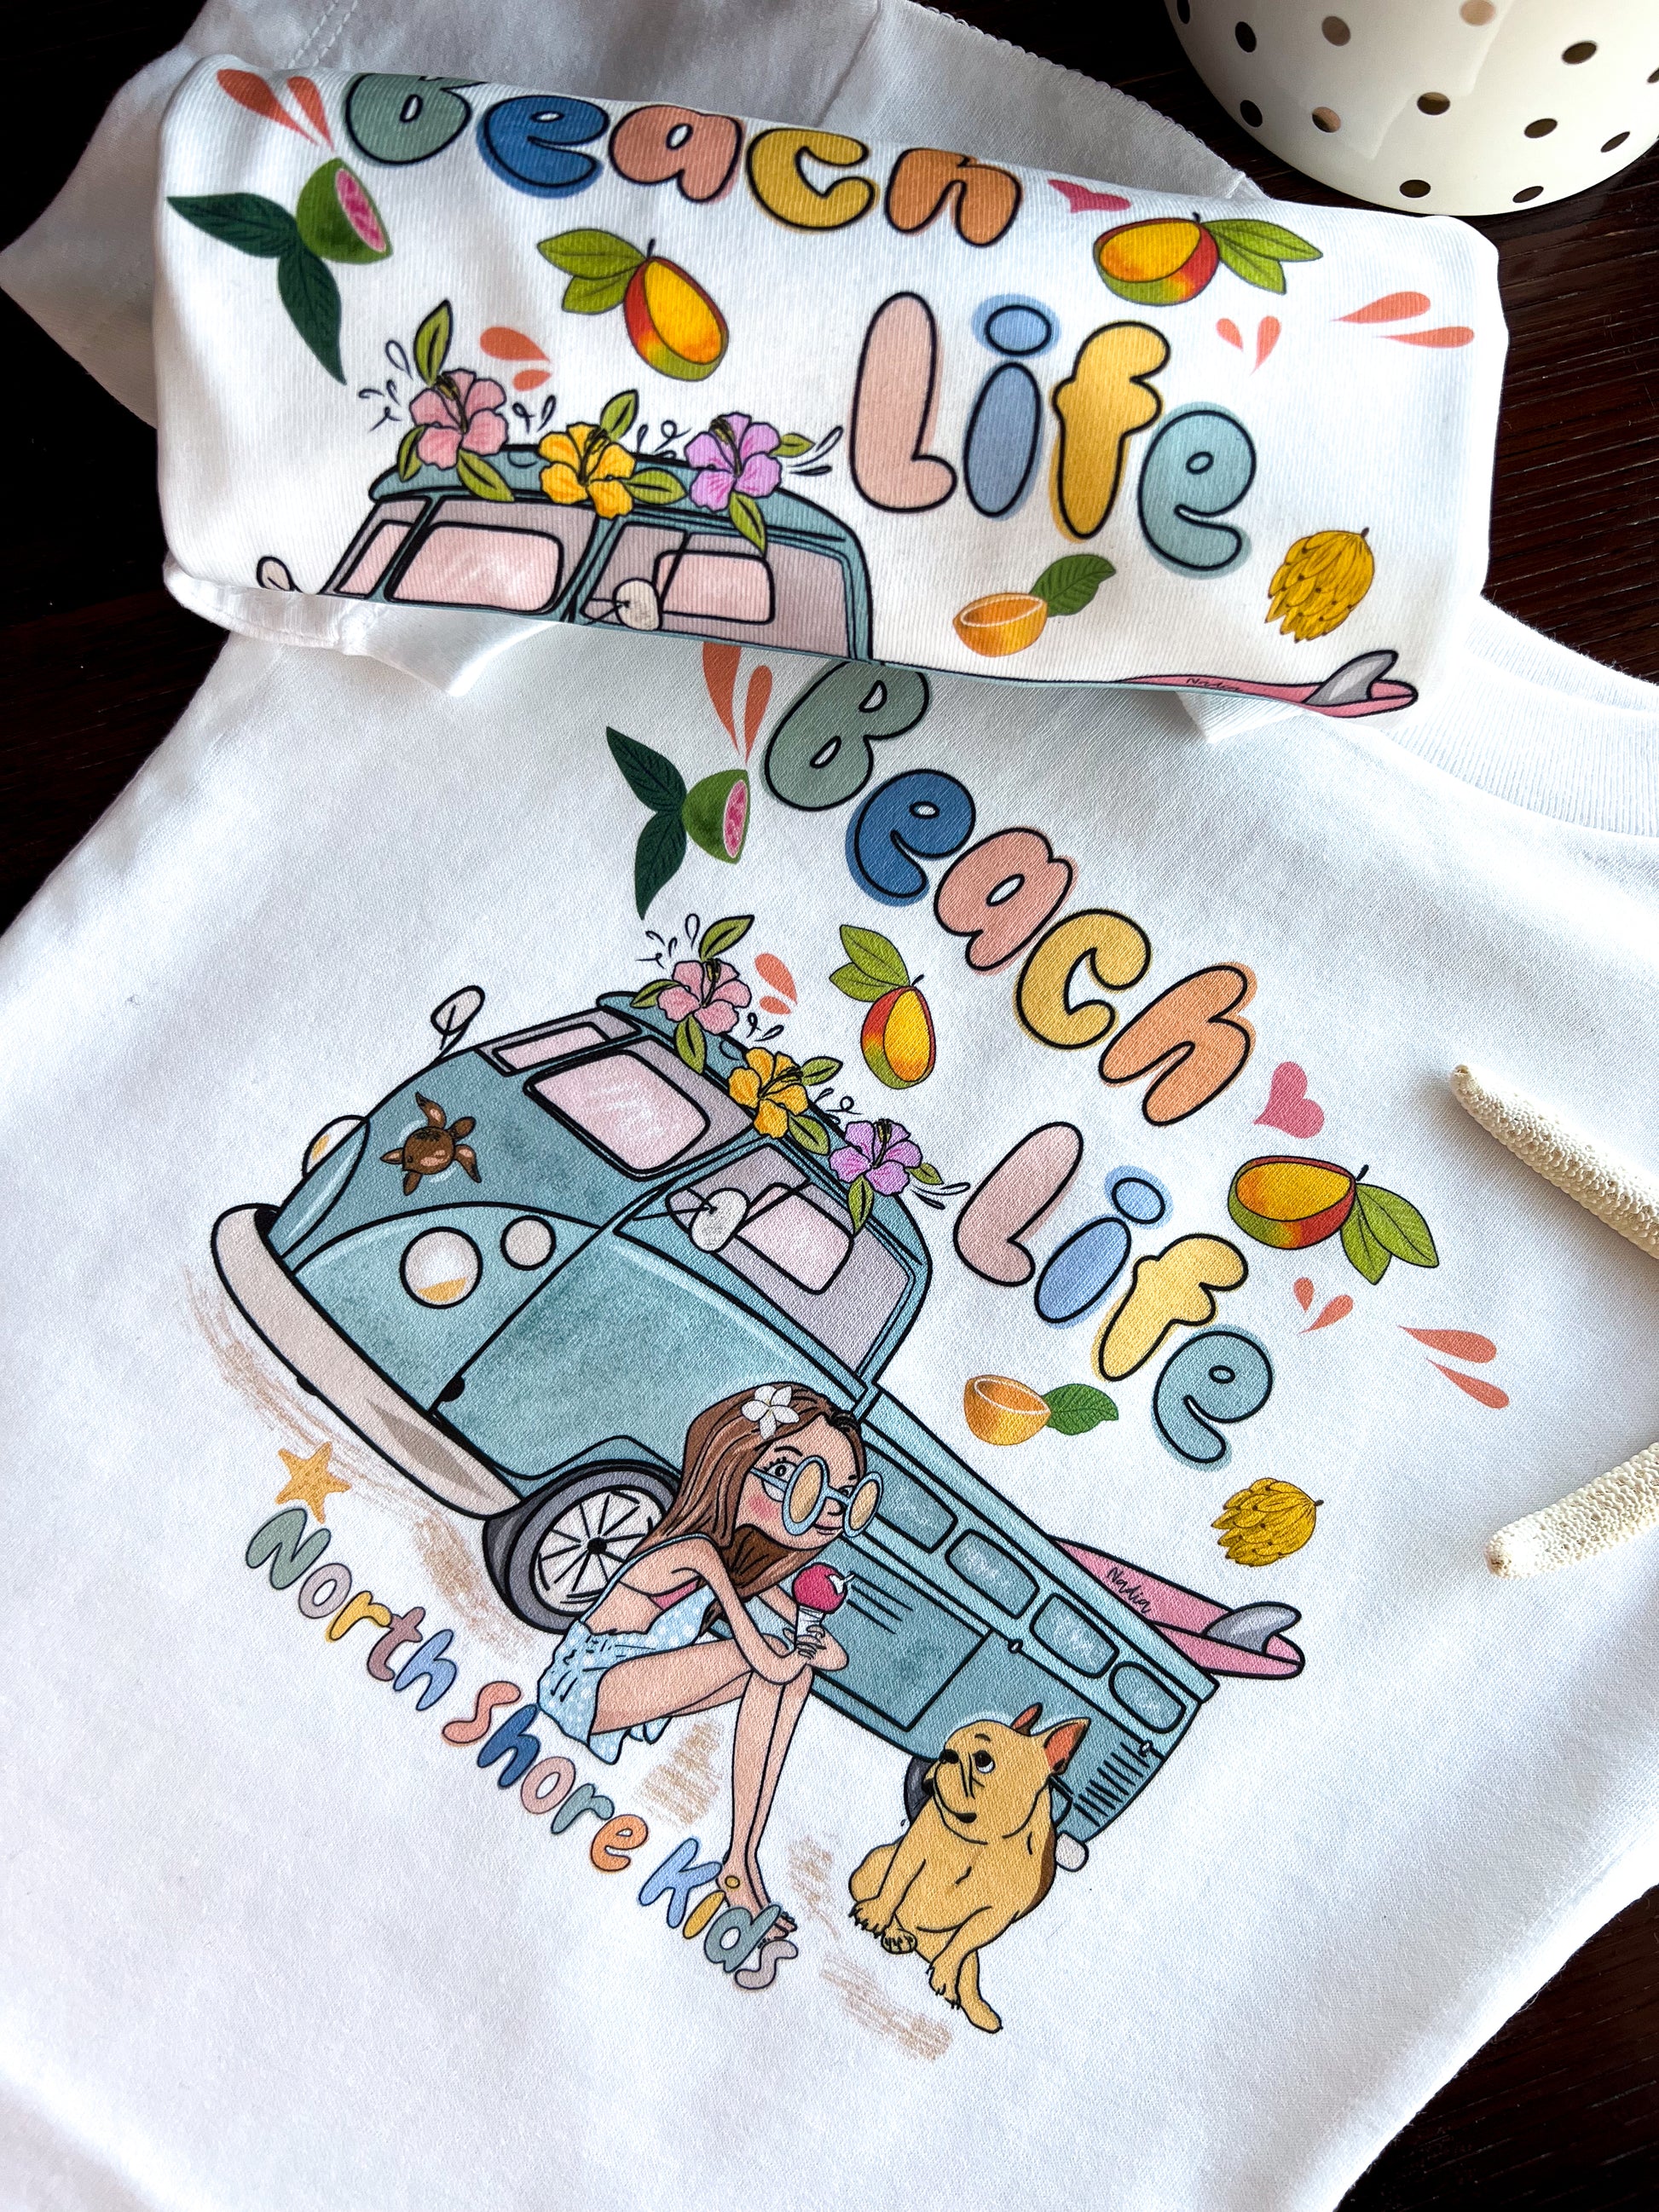 Handmade graphic tee for kids. Handmade clothing by a local artist in Southern California. Beach life graphic t-shirt